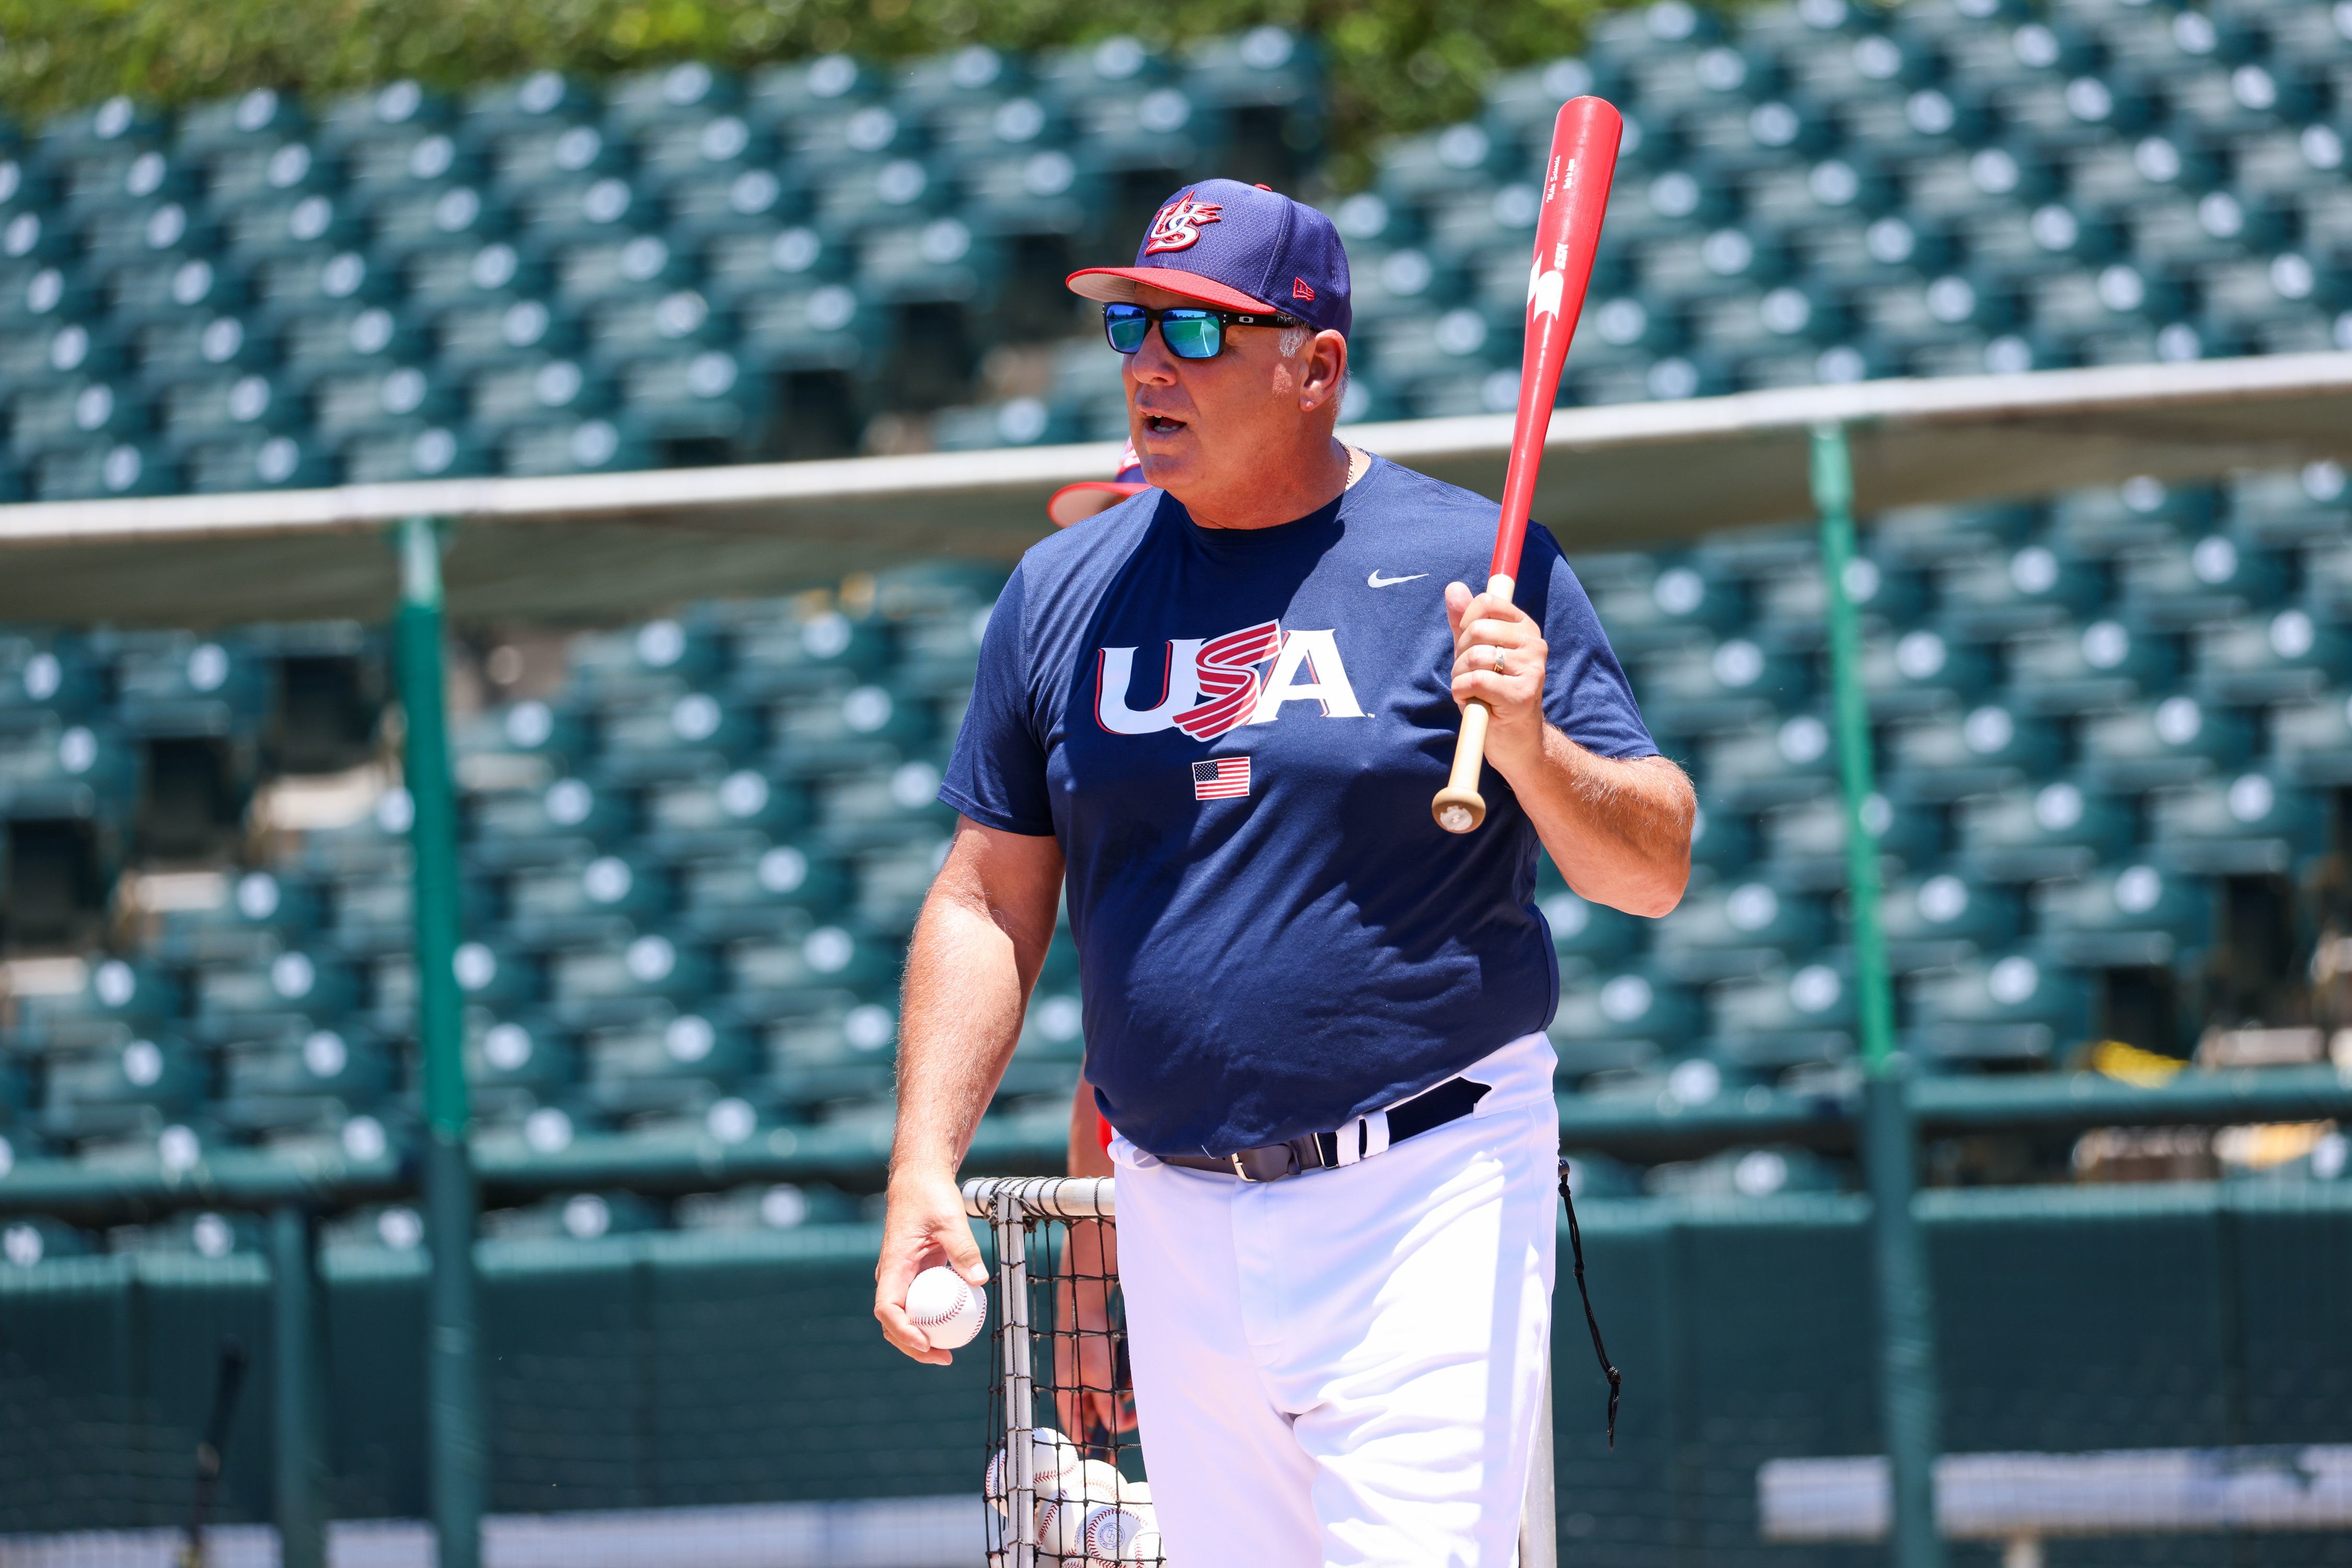 Mike Scioscia vying for Olympics gold as United States baseball